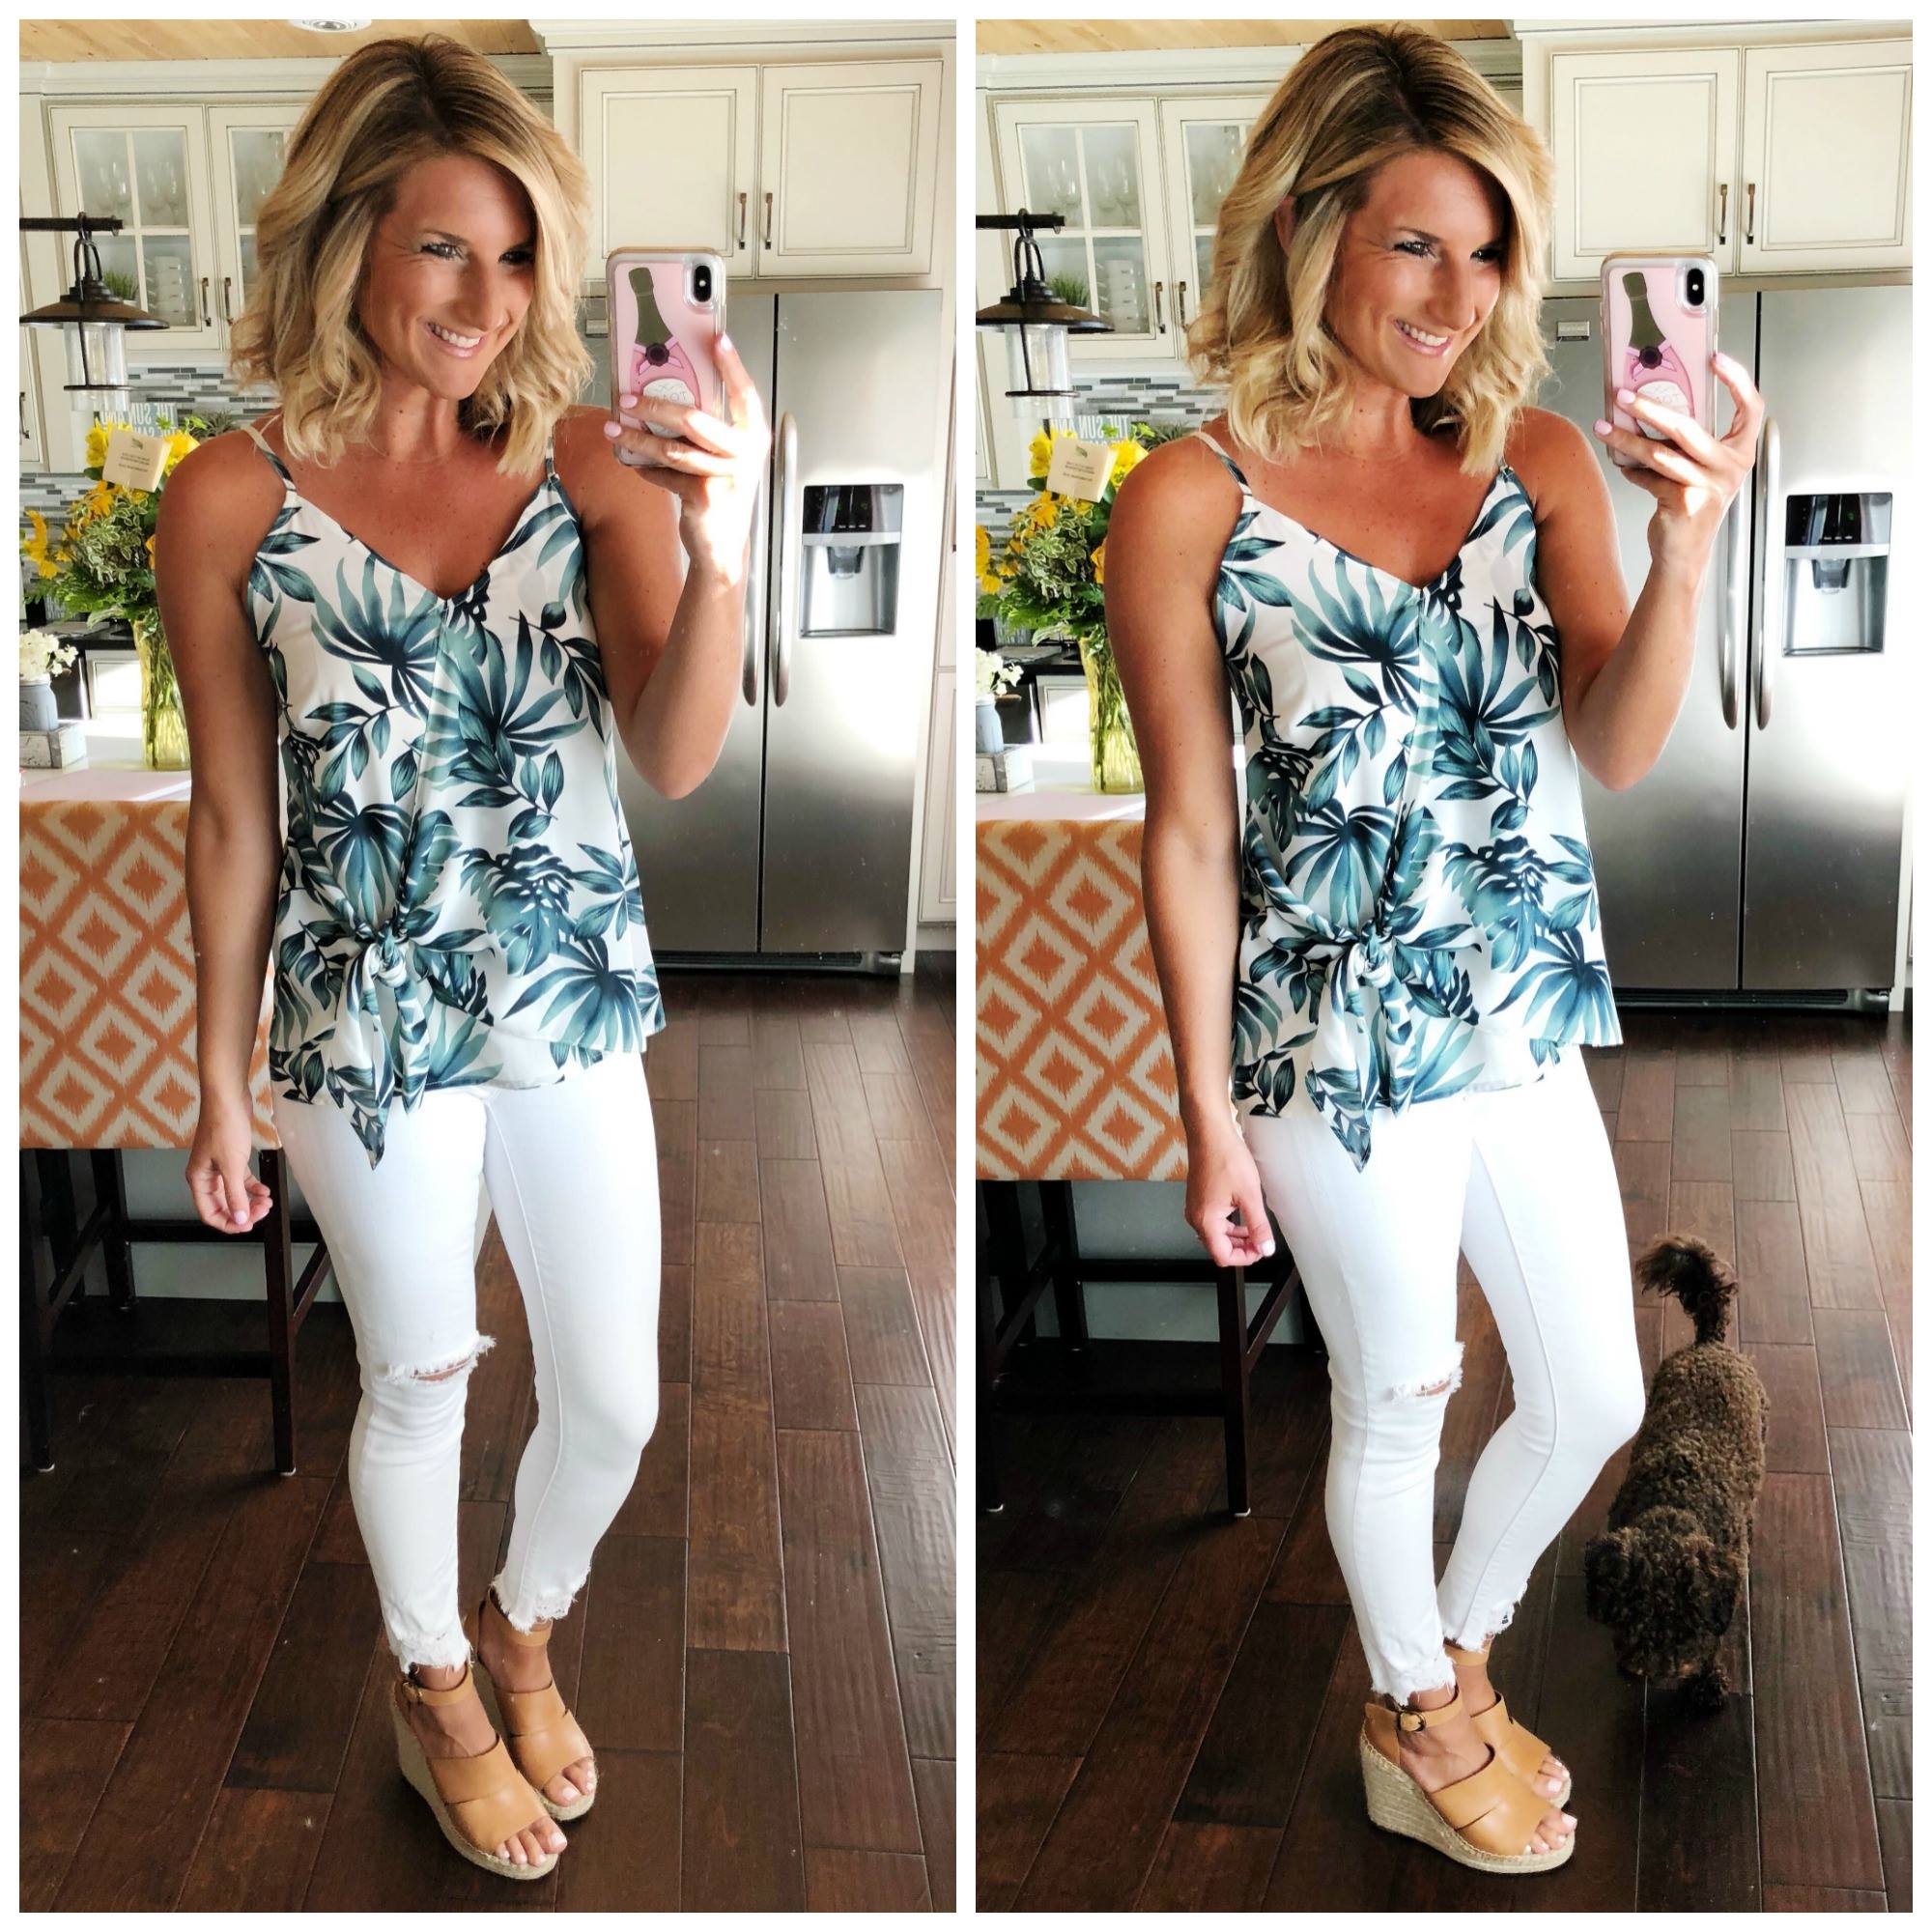 How to Style White Jeans / Palm Print Top / Tie Front Top with White Jeans and Wedge Sandals